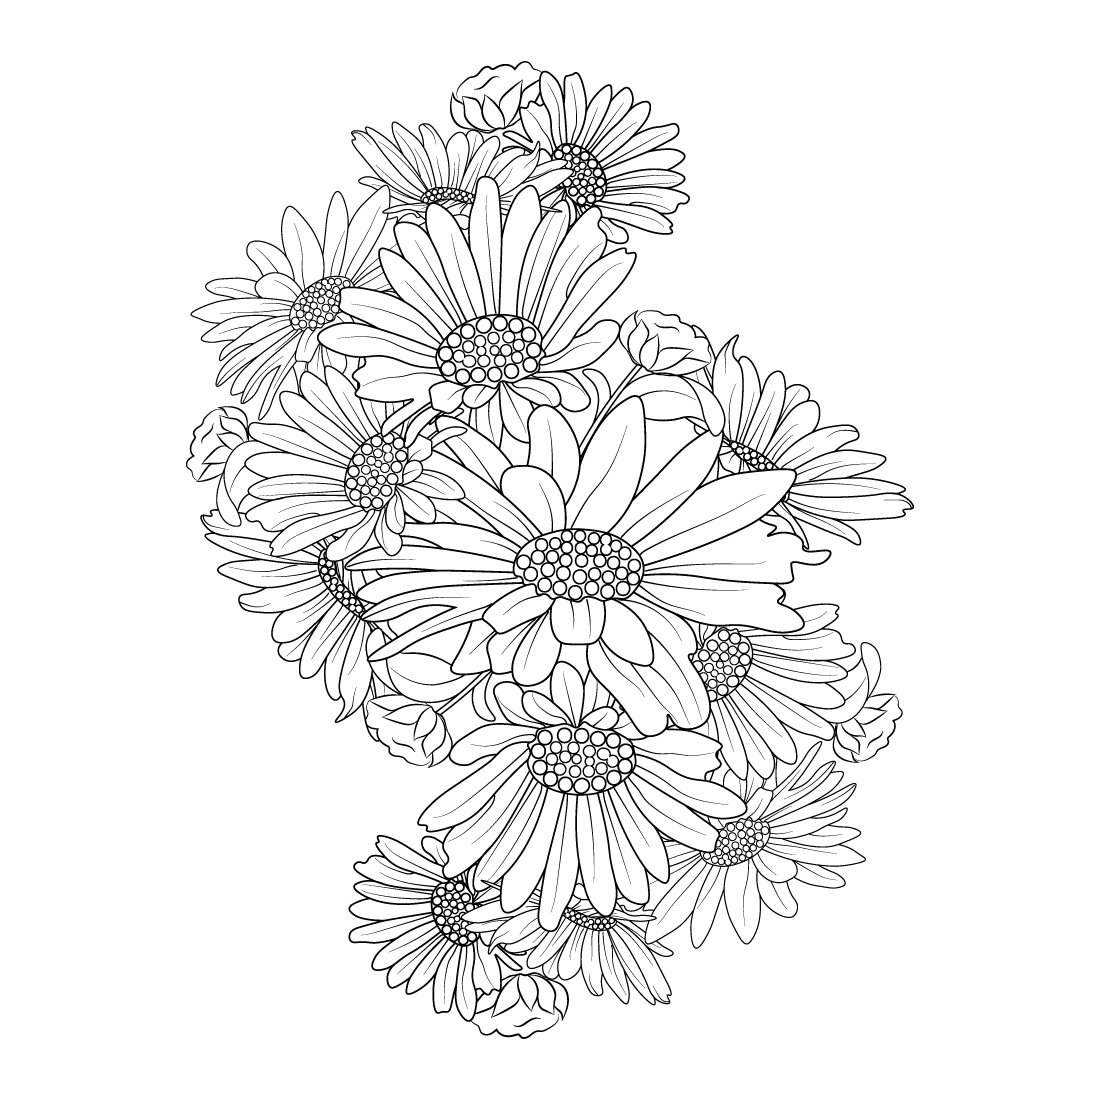 Zentangle tattoo design with daisy flowers relaxation flower coloring pages for adults